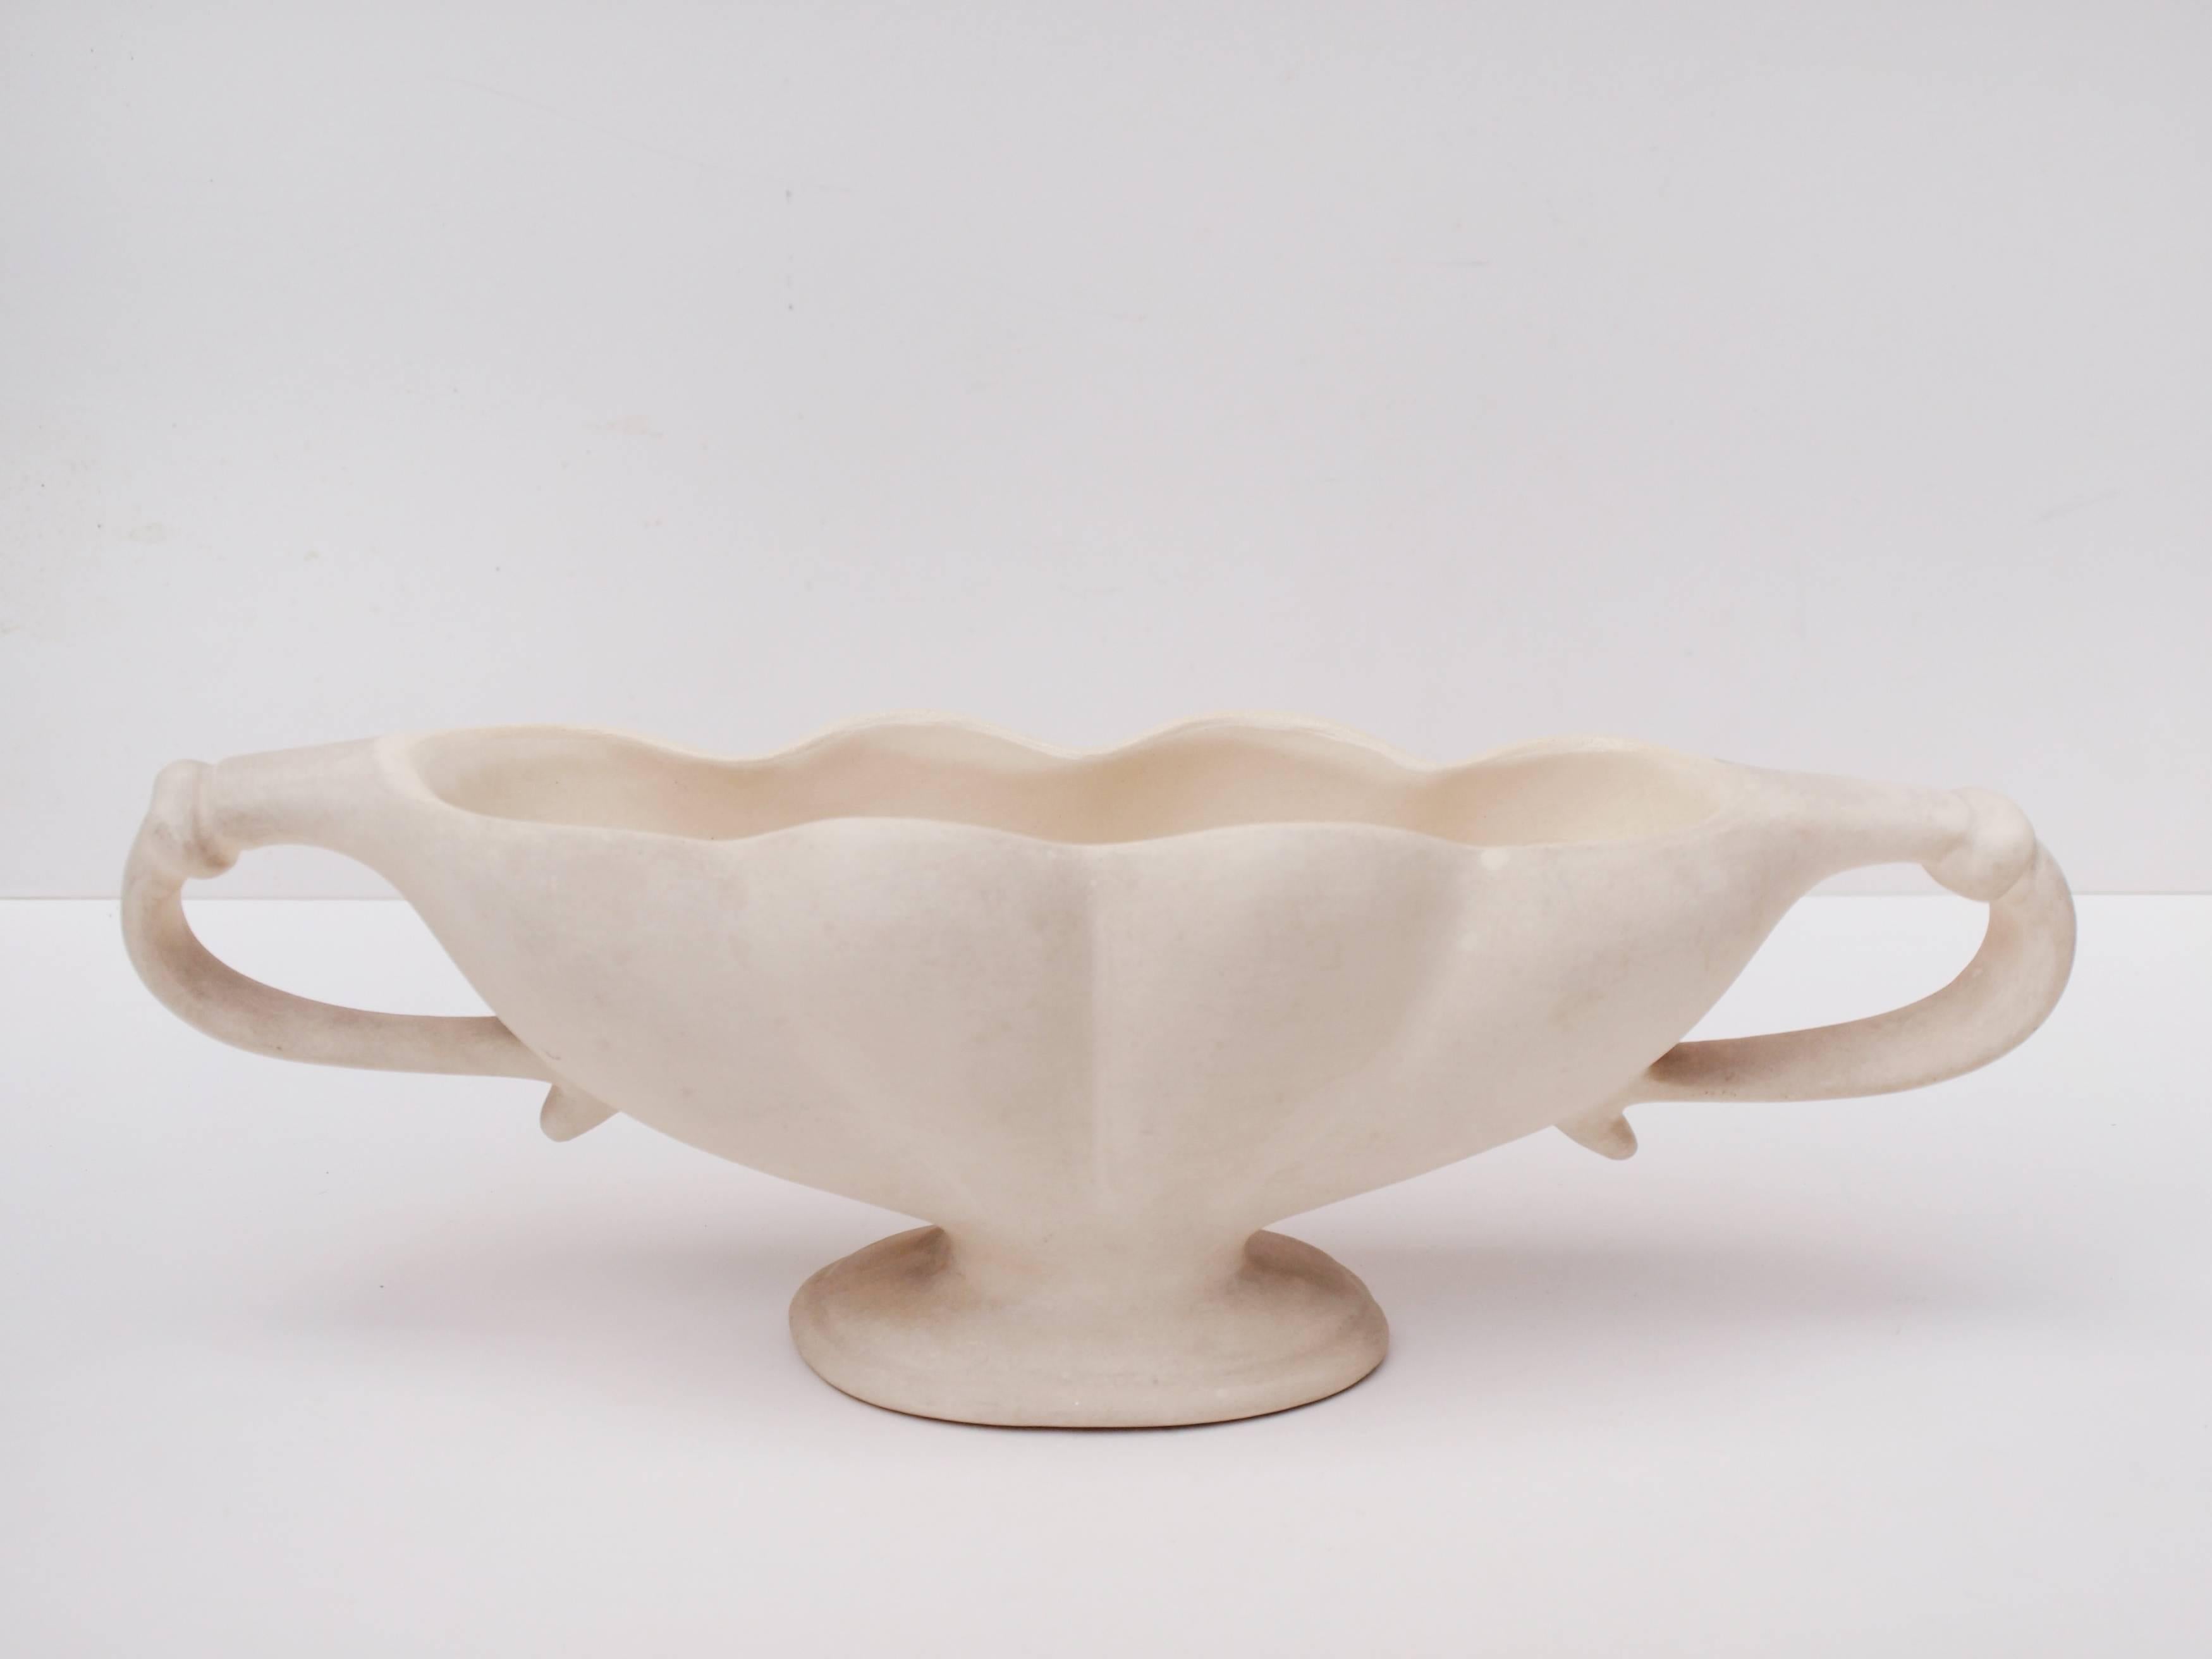 Anl ivory glazed twin-handled mantel vase designed by the influential florist constance spry for Fulham Pottery. The exterior of the vase is matte, with a gloss interior. Stamped to the base with Fulham Pottery.

The undulating shape of this vase